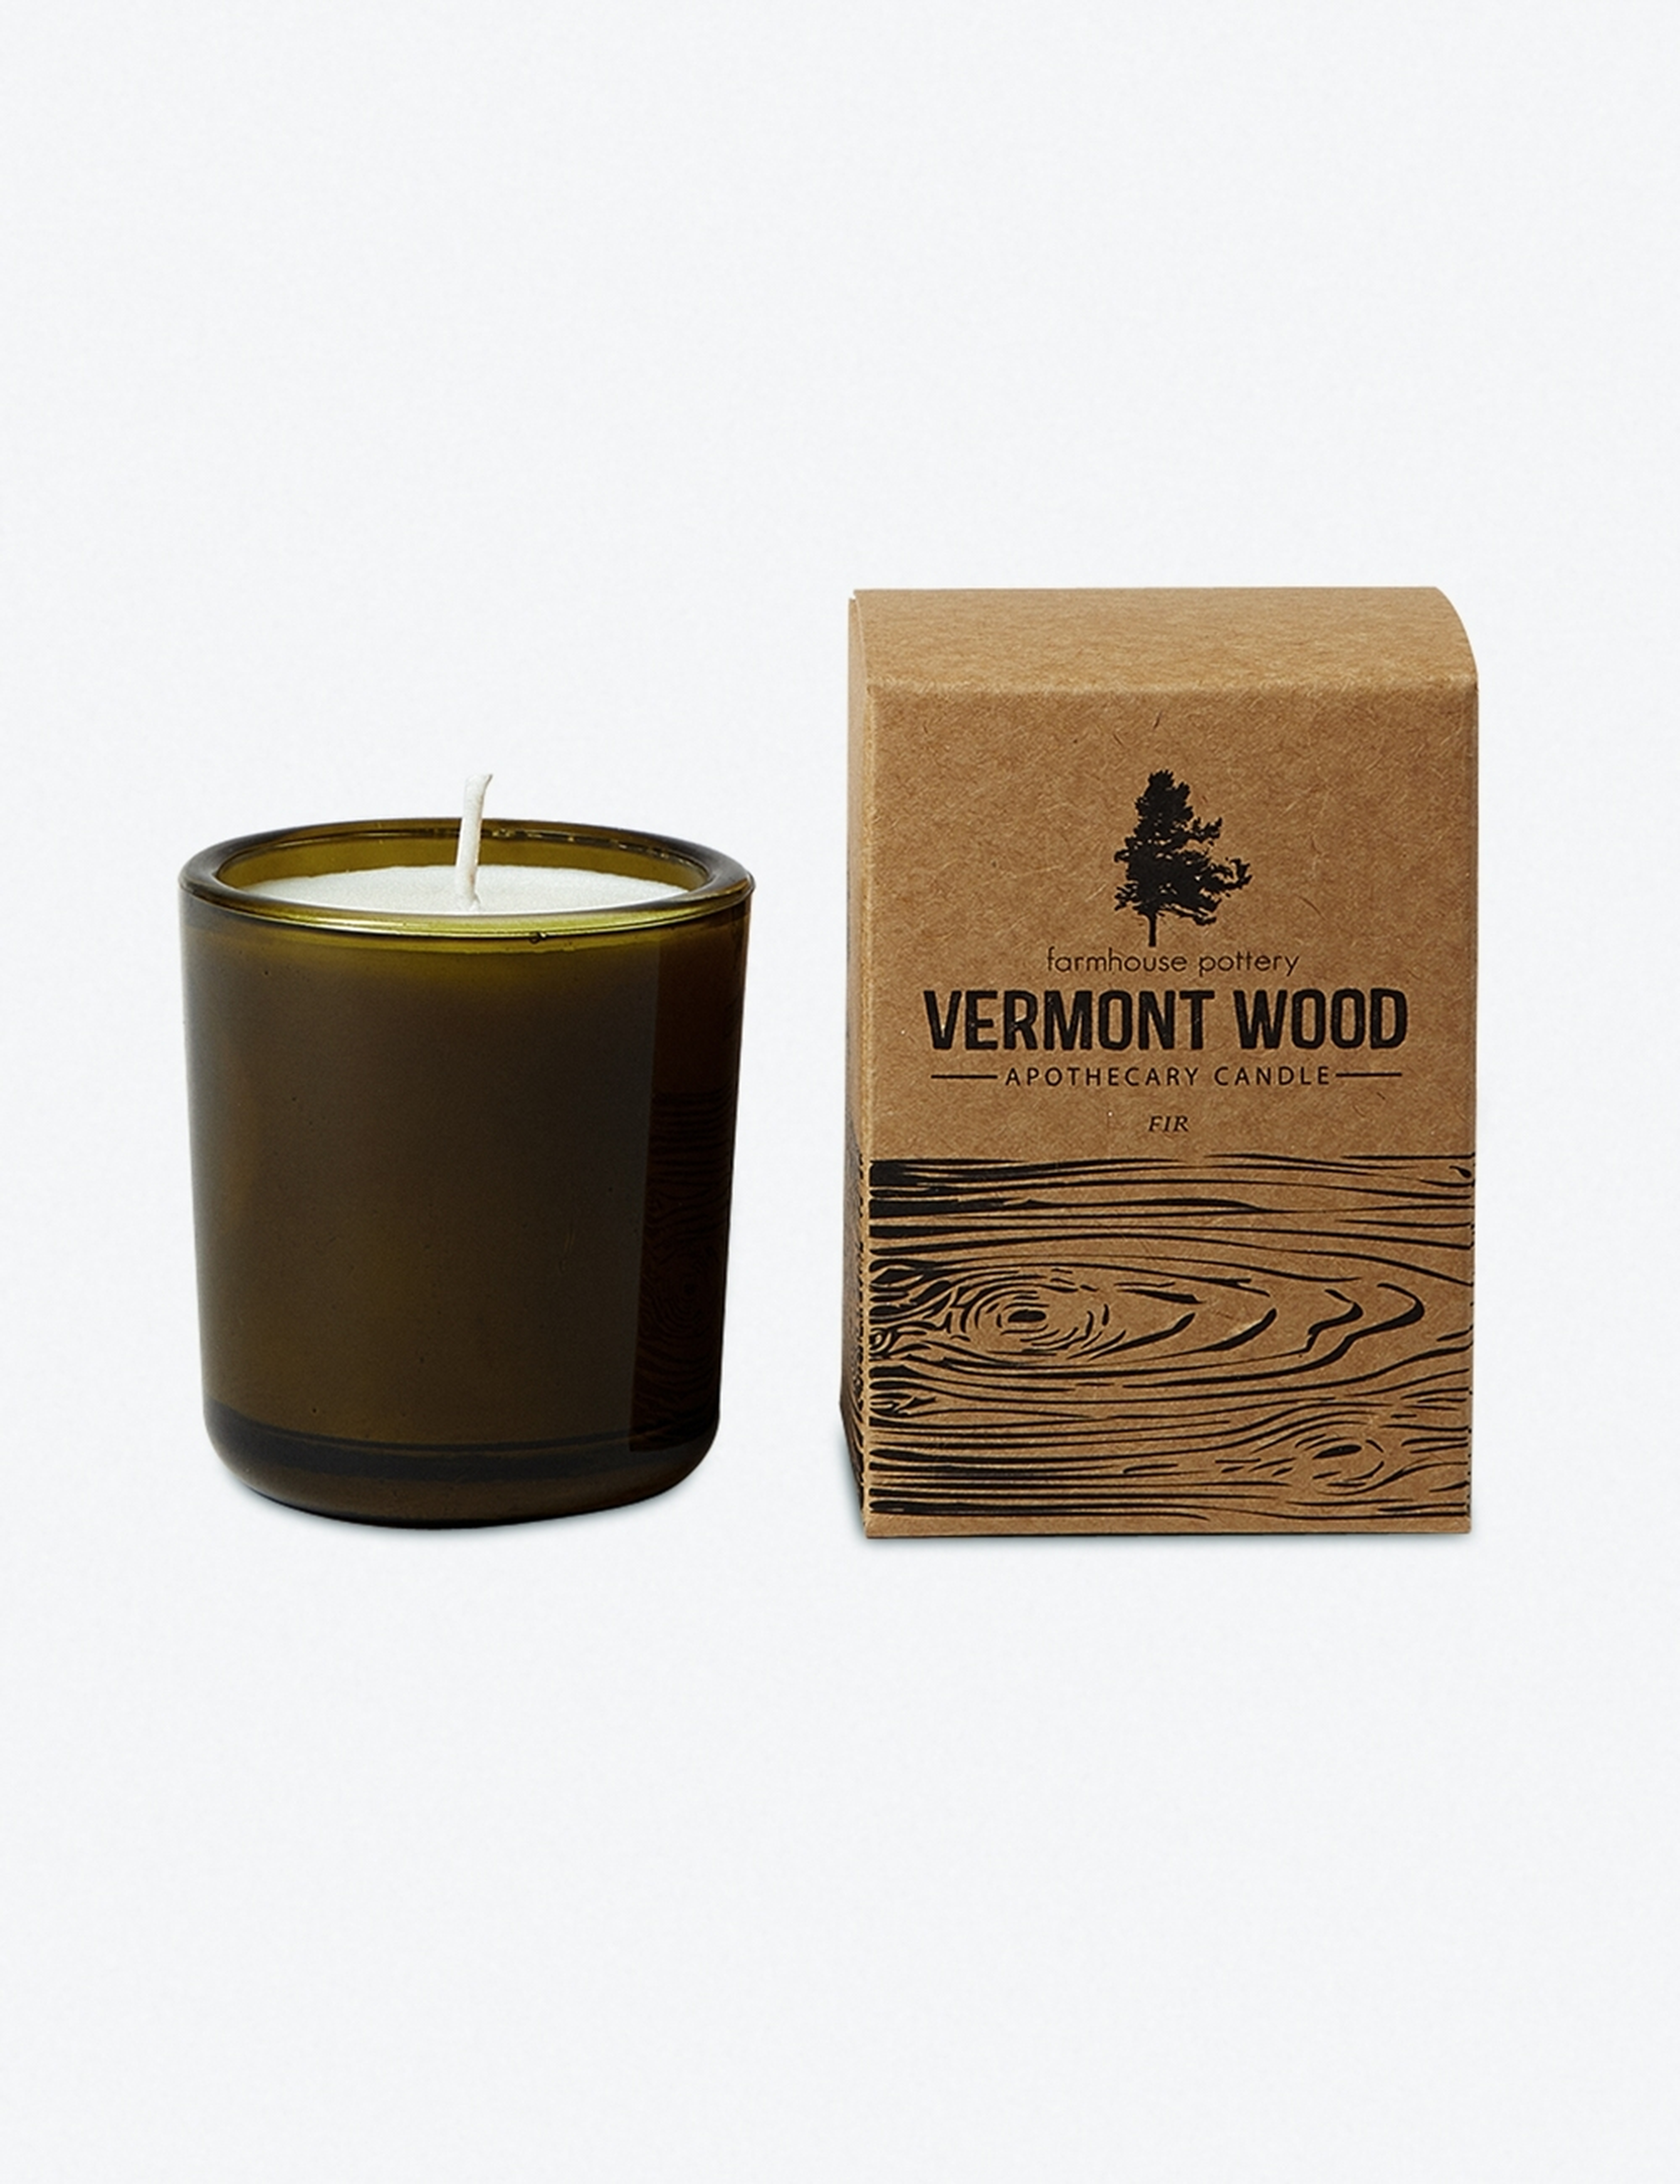 Vermont Wood Candle by Farmhouse Pottery - Lulu and Georgia